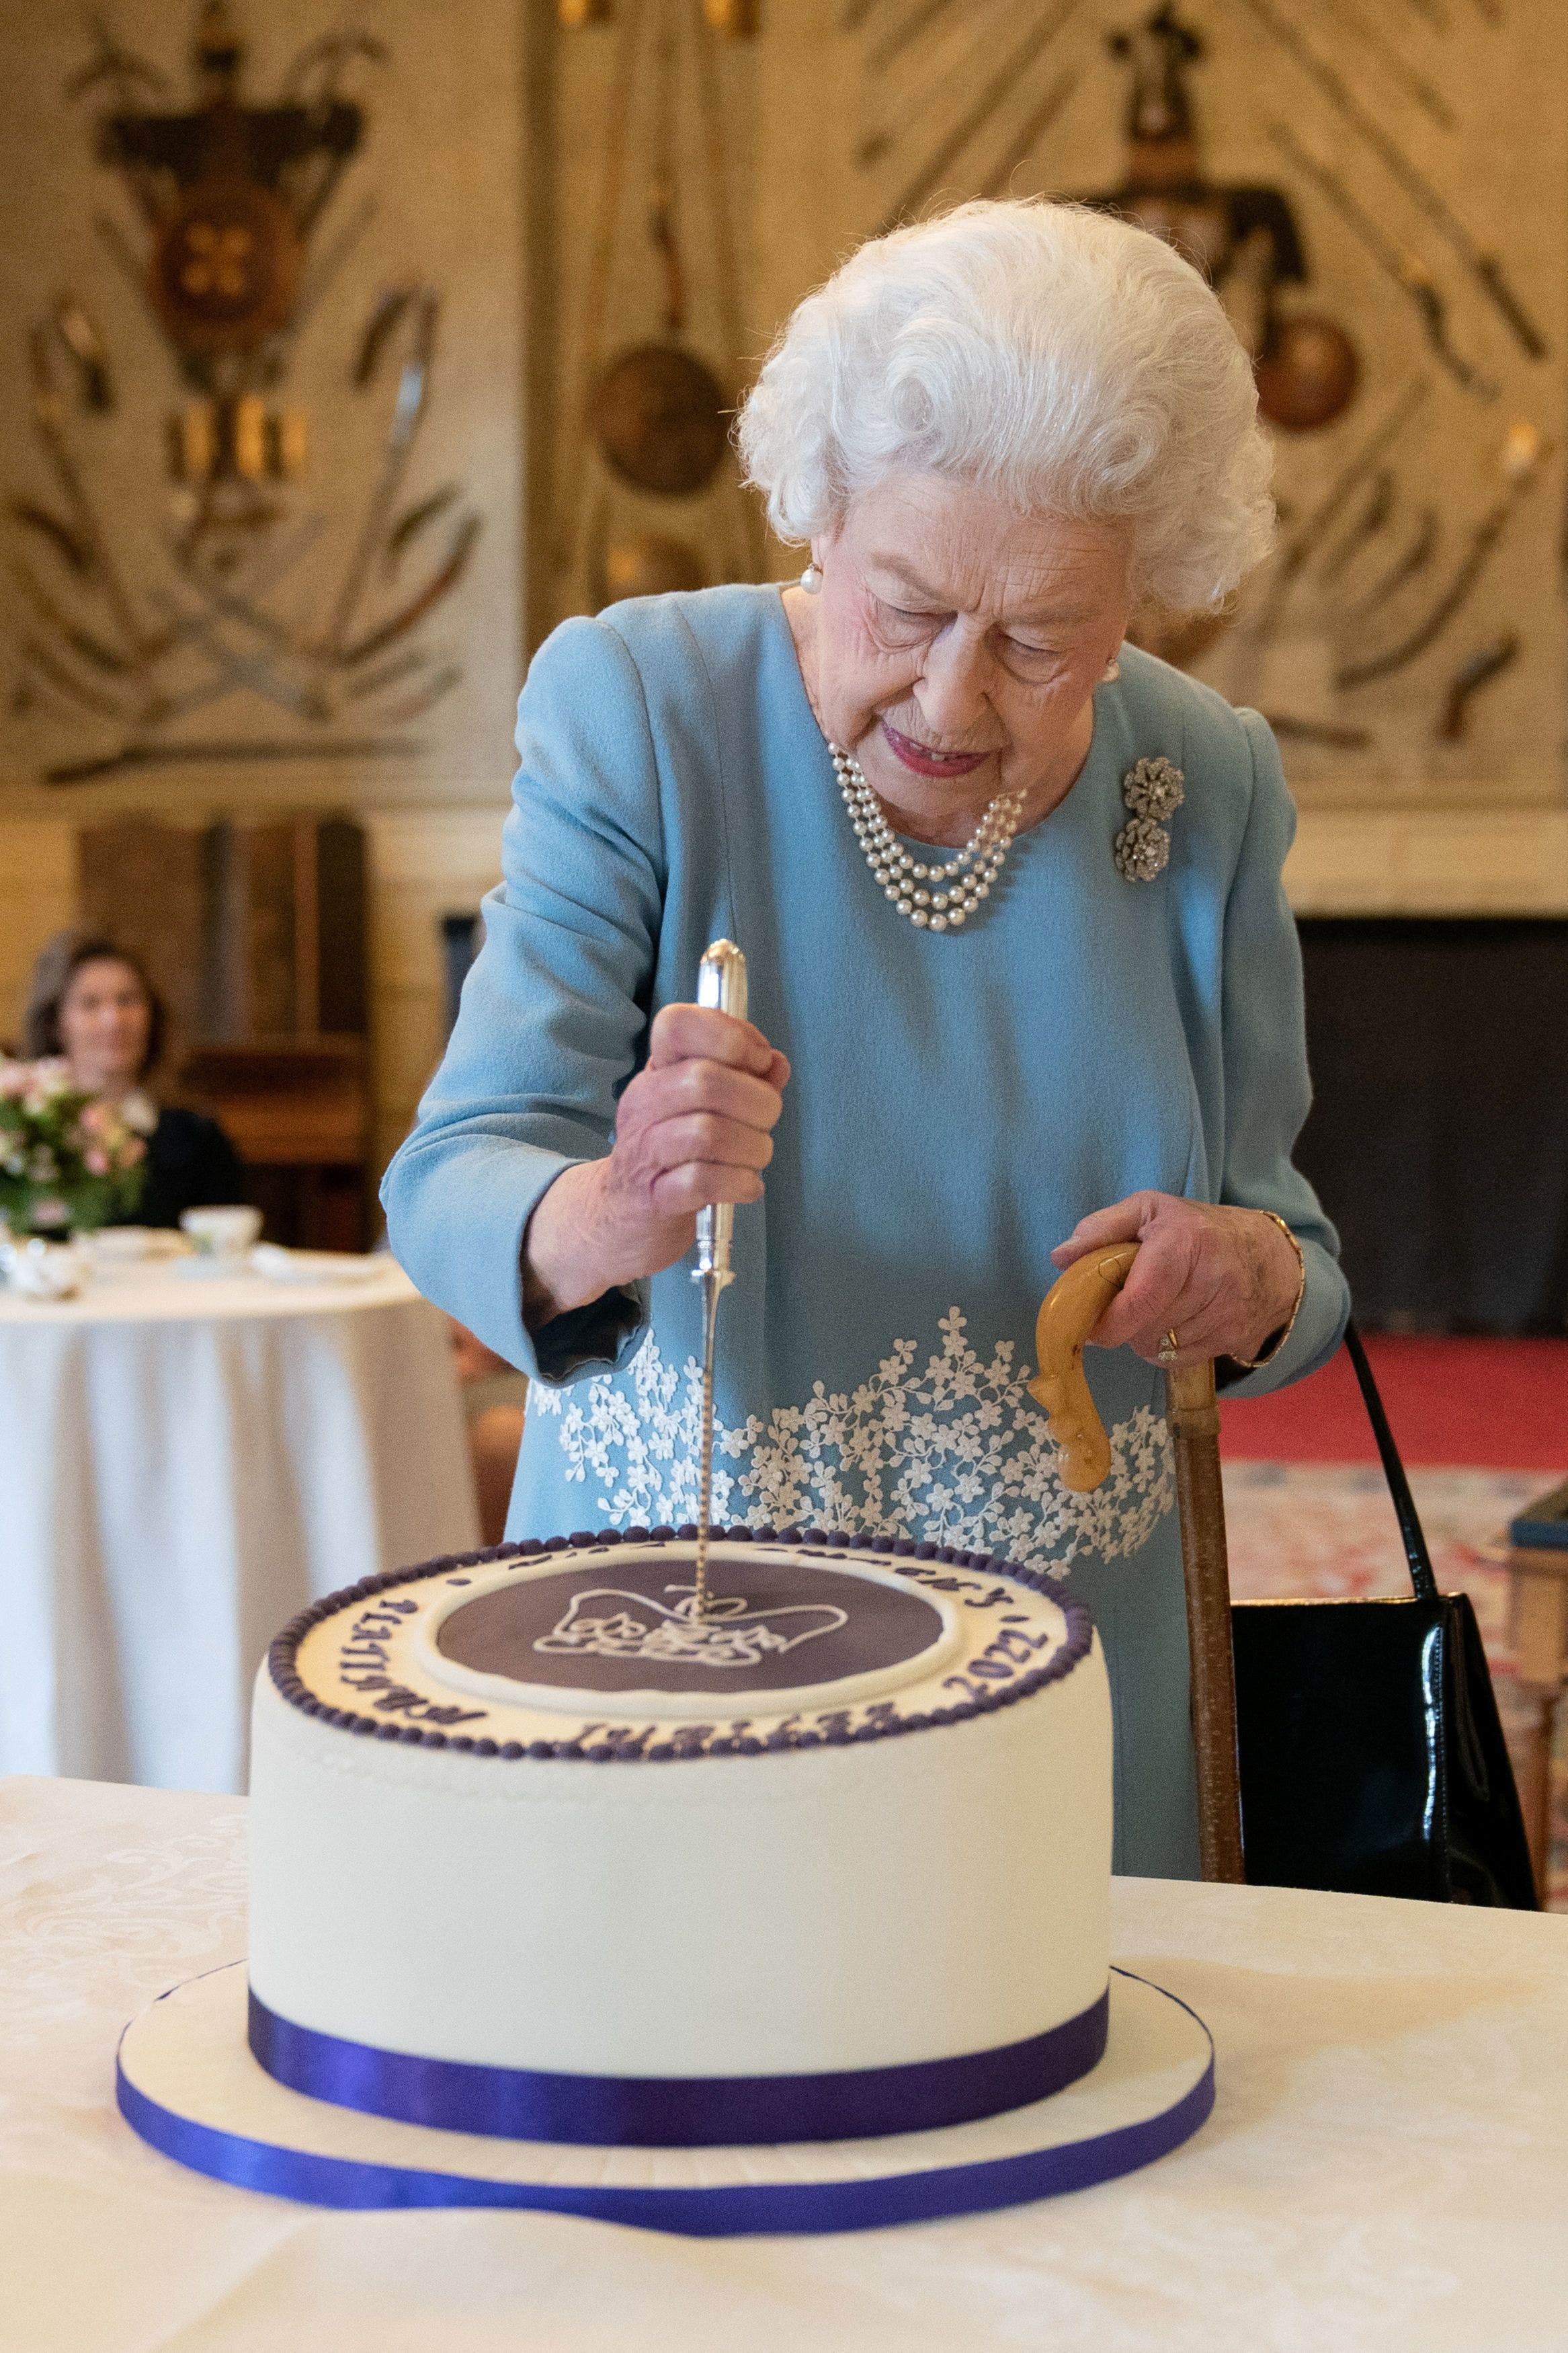 Britain's Queen Elizabeth cuts a cake to celebrate the start of the Platinum Jubilee during a reception in the Ballroom of Sandringham House, in Sandringham, Britain, February 5, 2022. (Reuters)